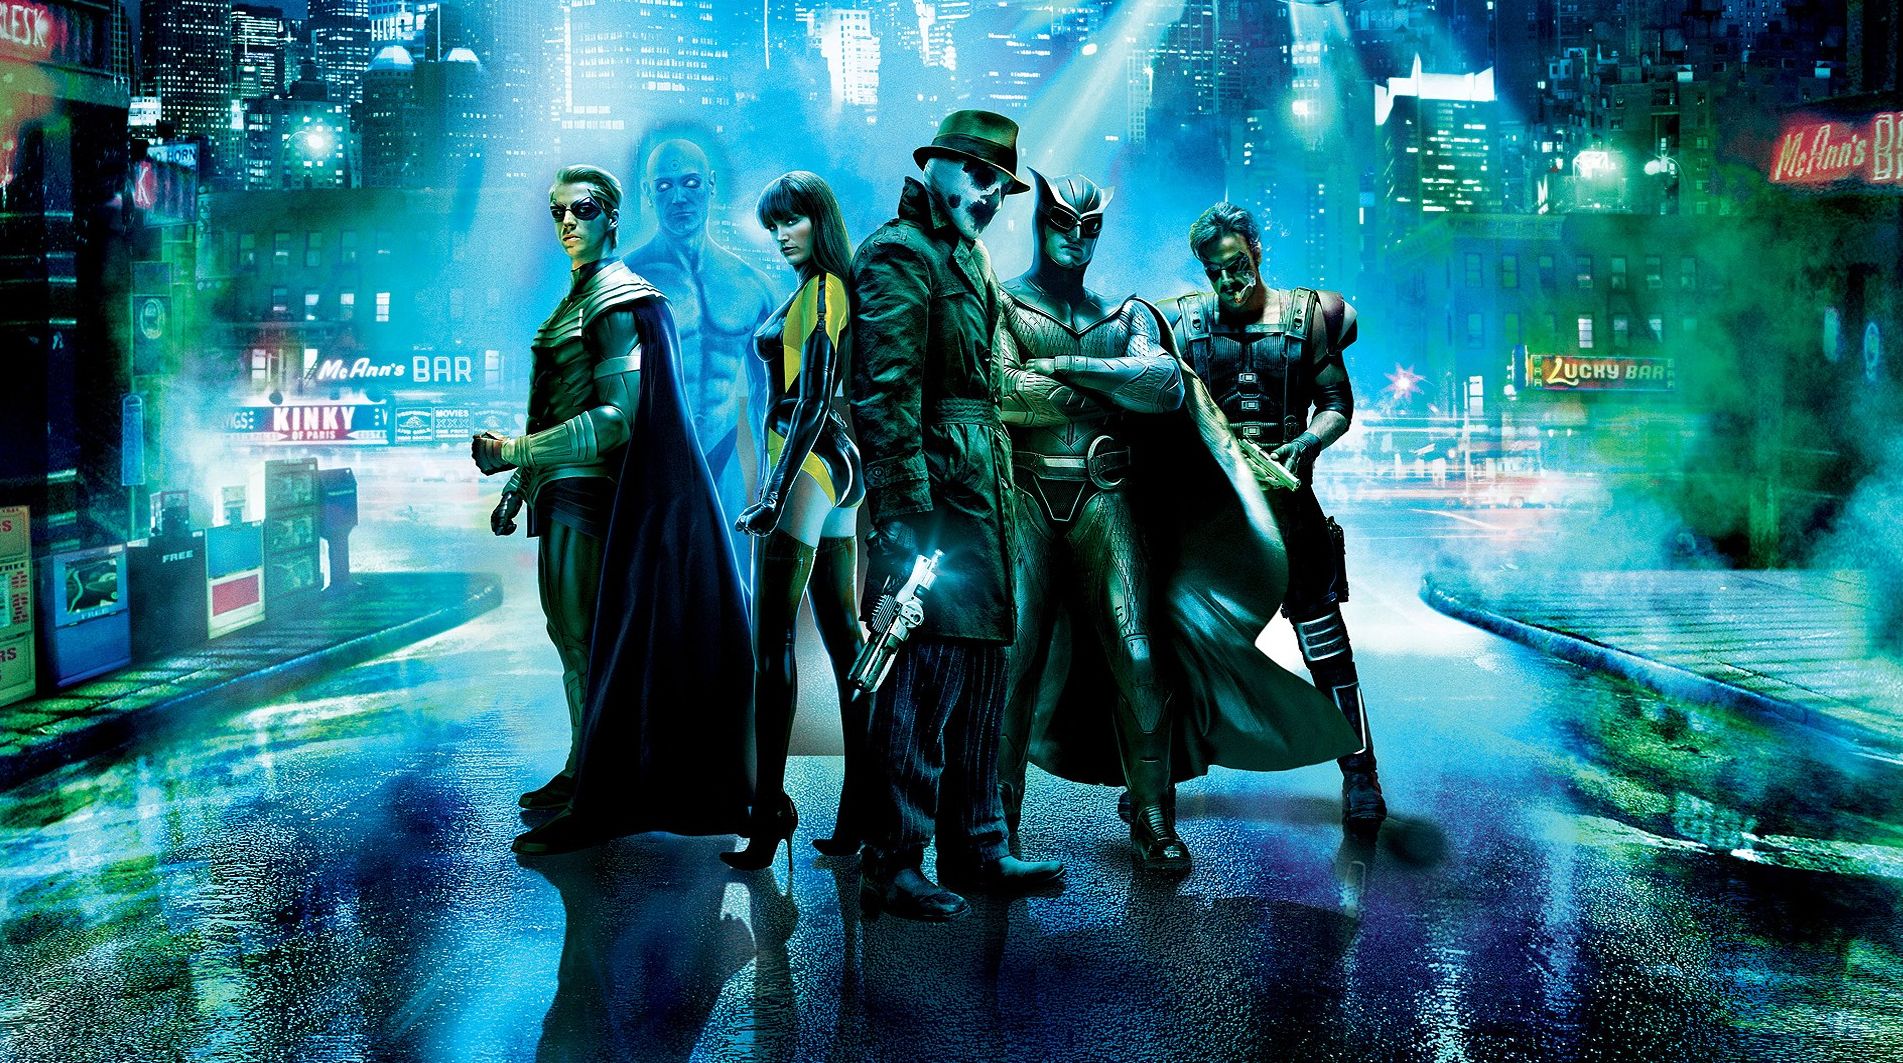 HBO confirms preliminary discussions on Watchmen TV series